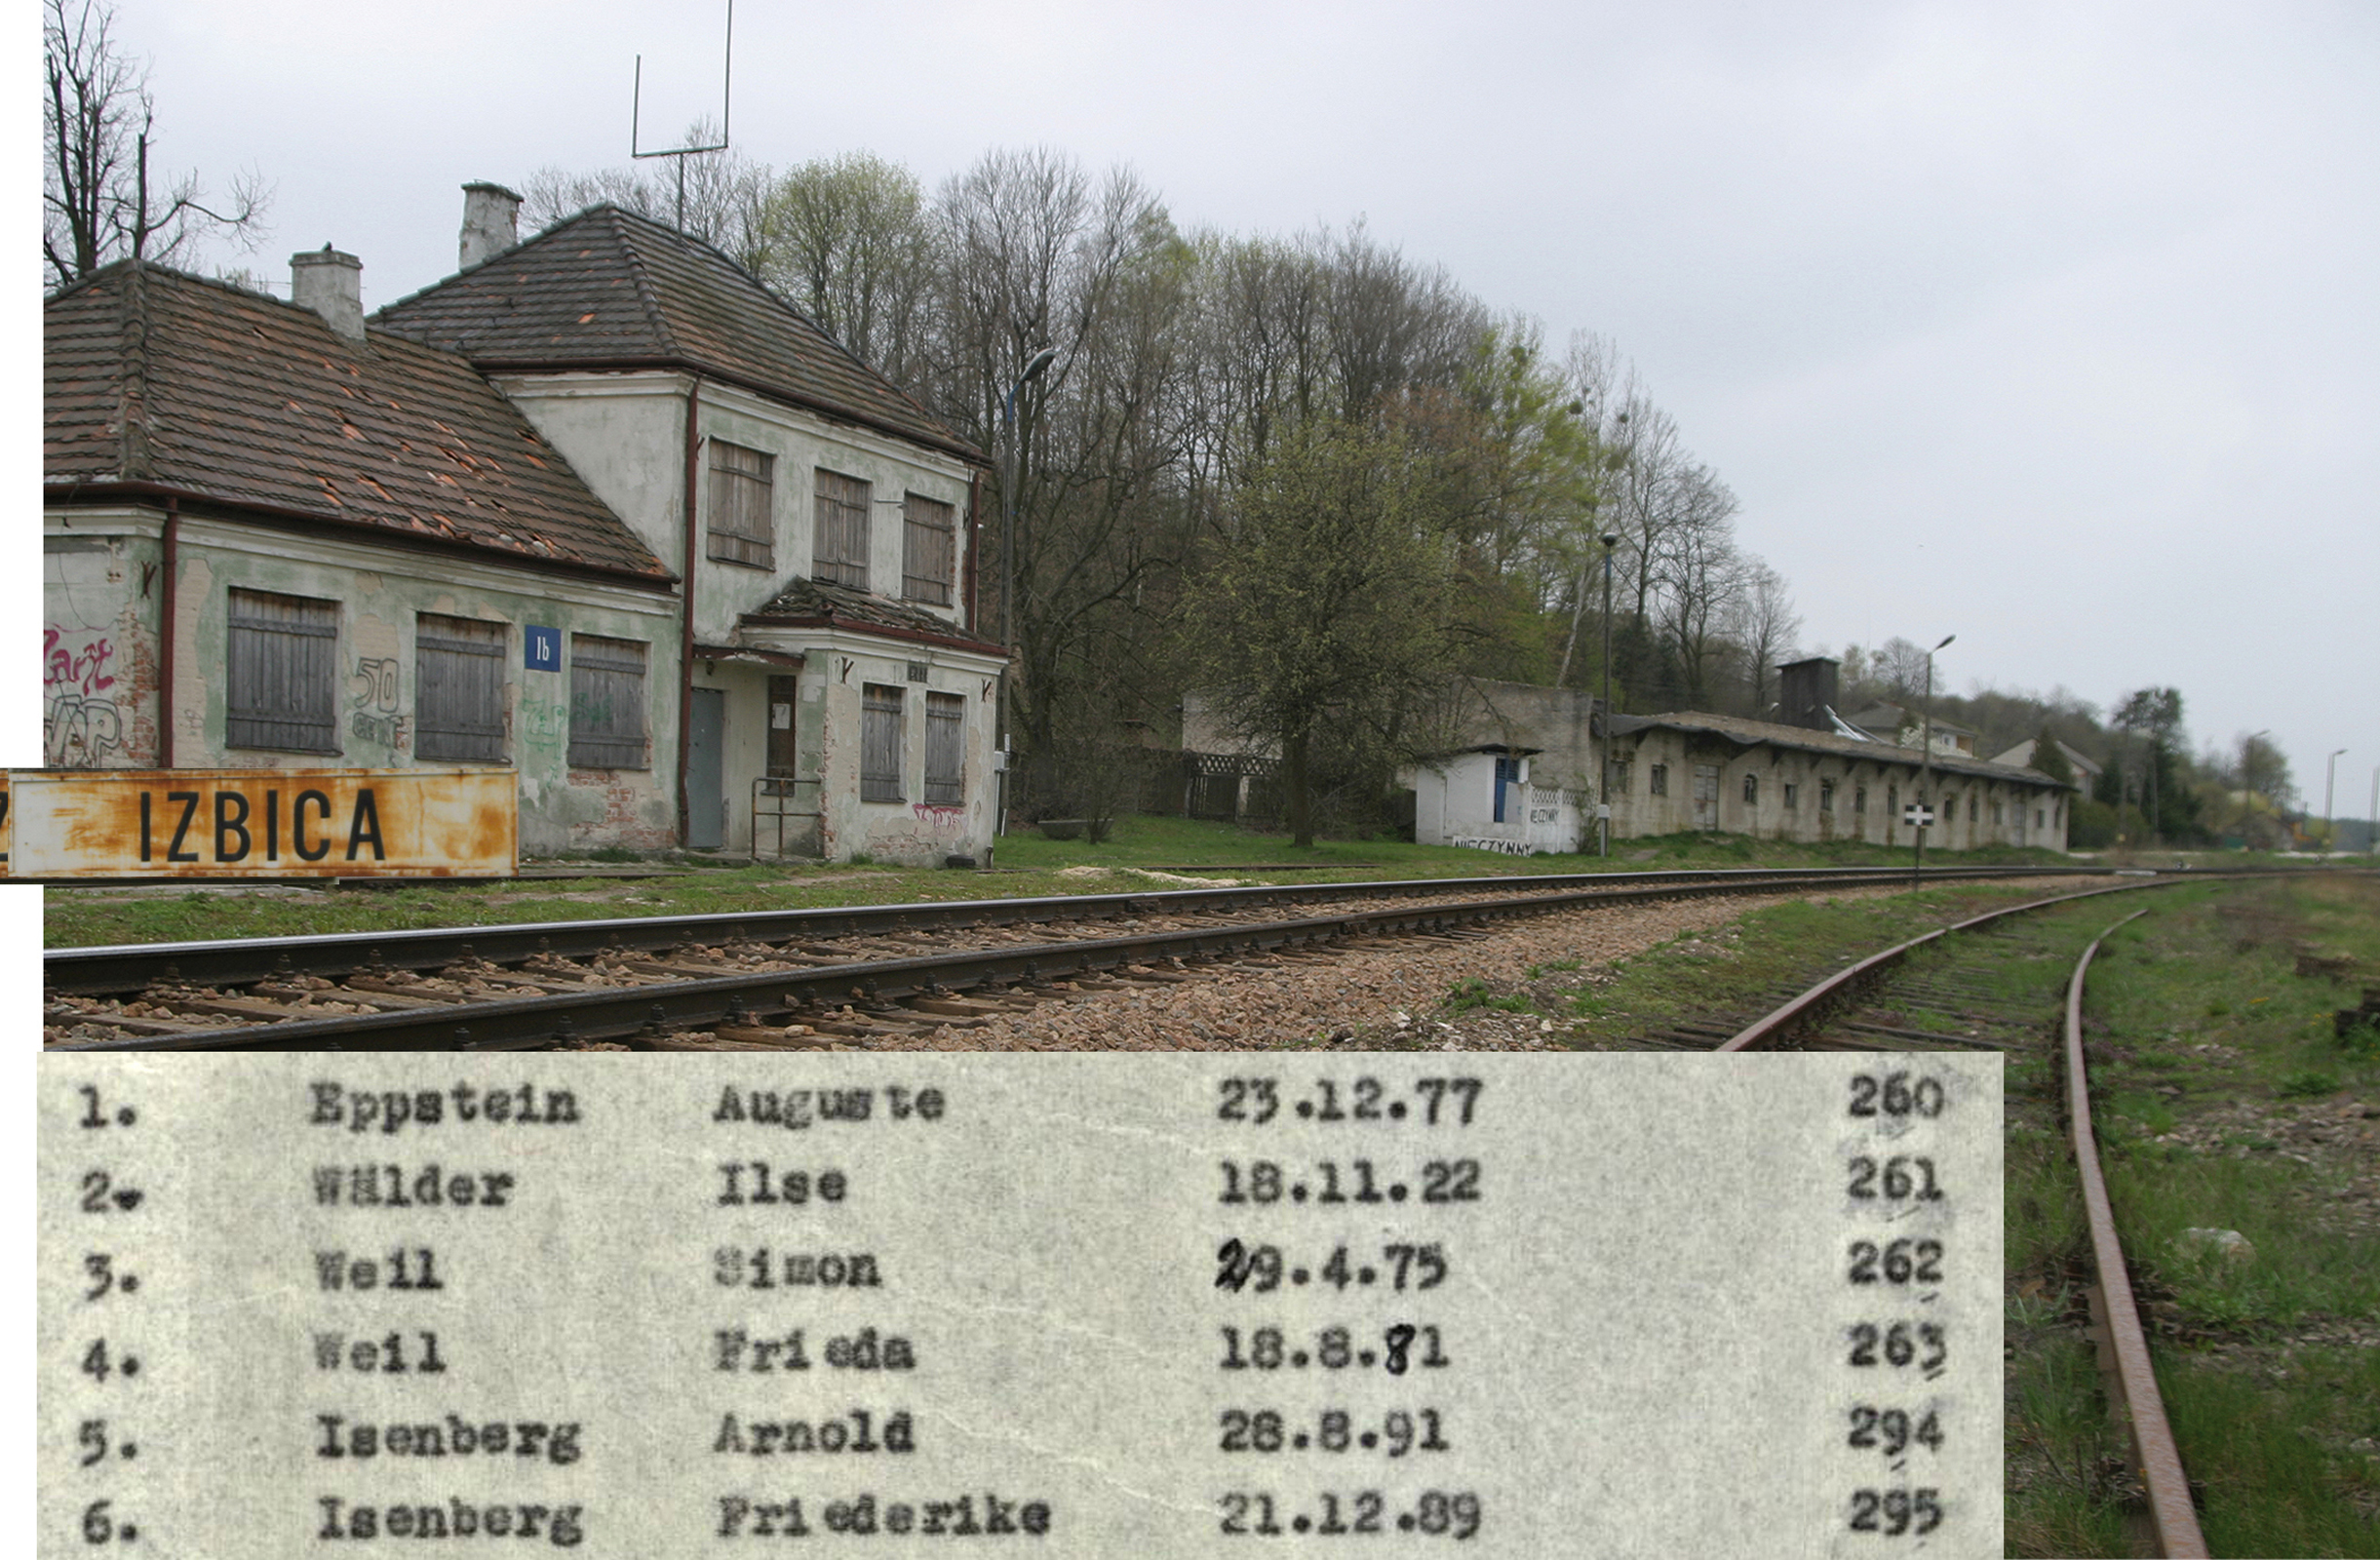 Railroad station in the Izbica ghetto and deportation list.